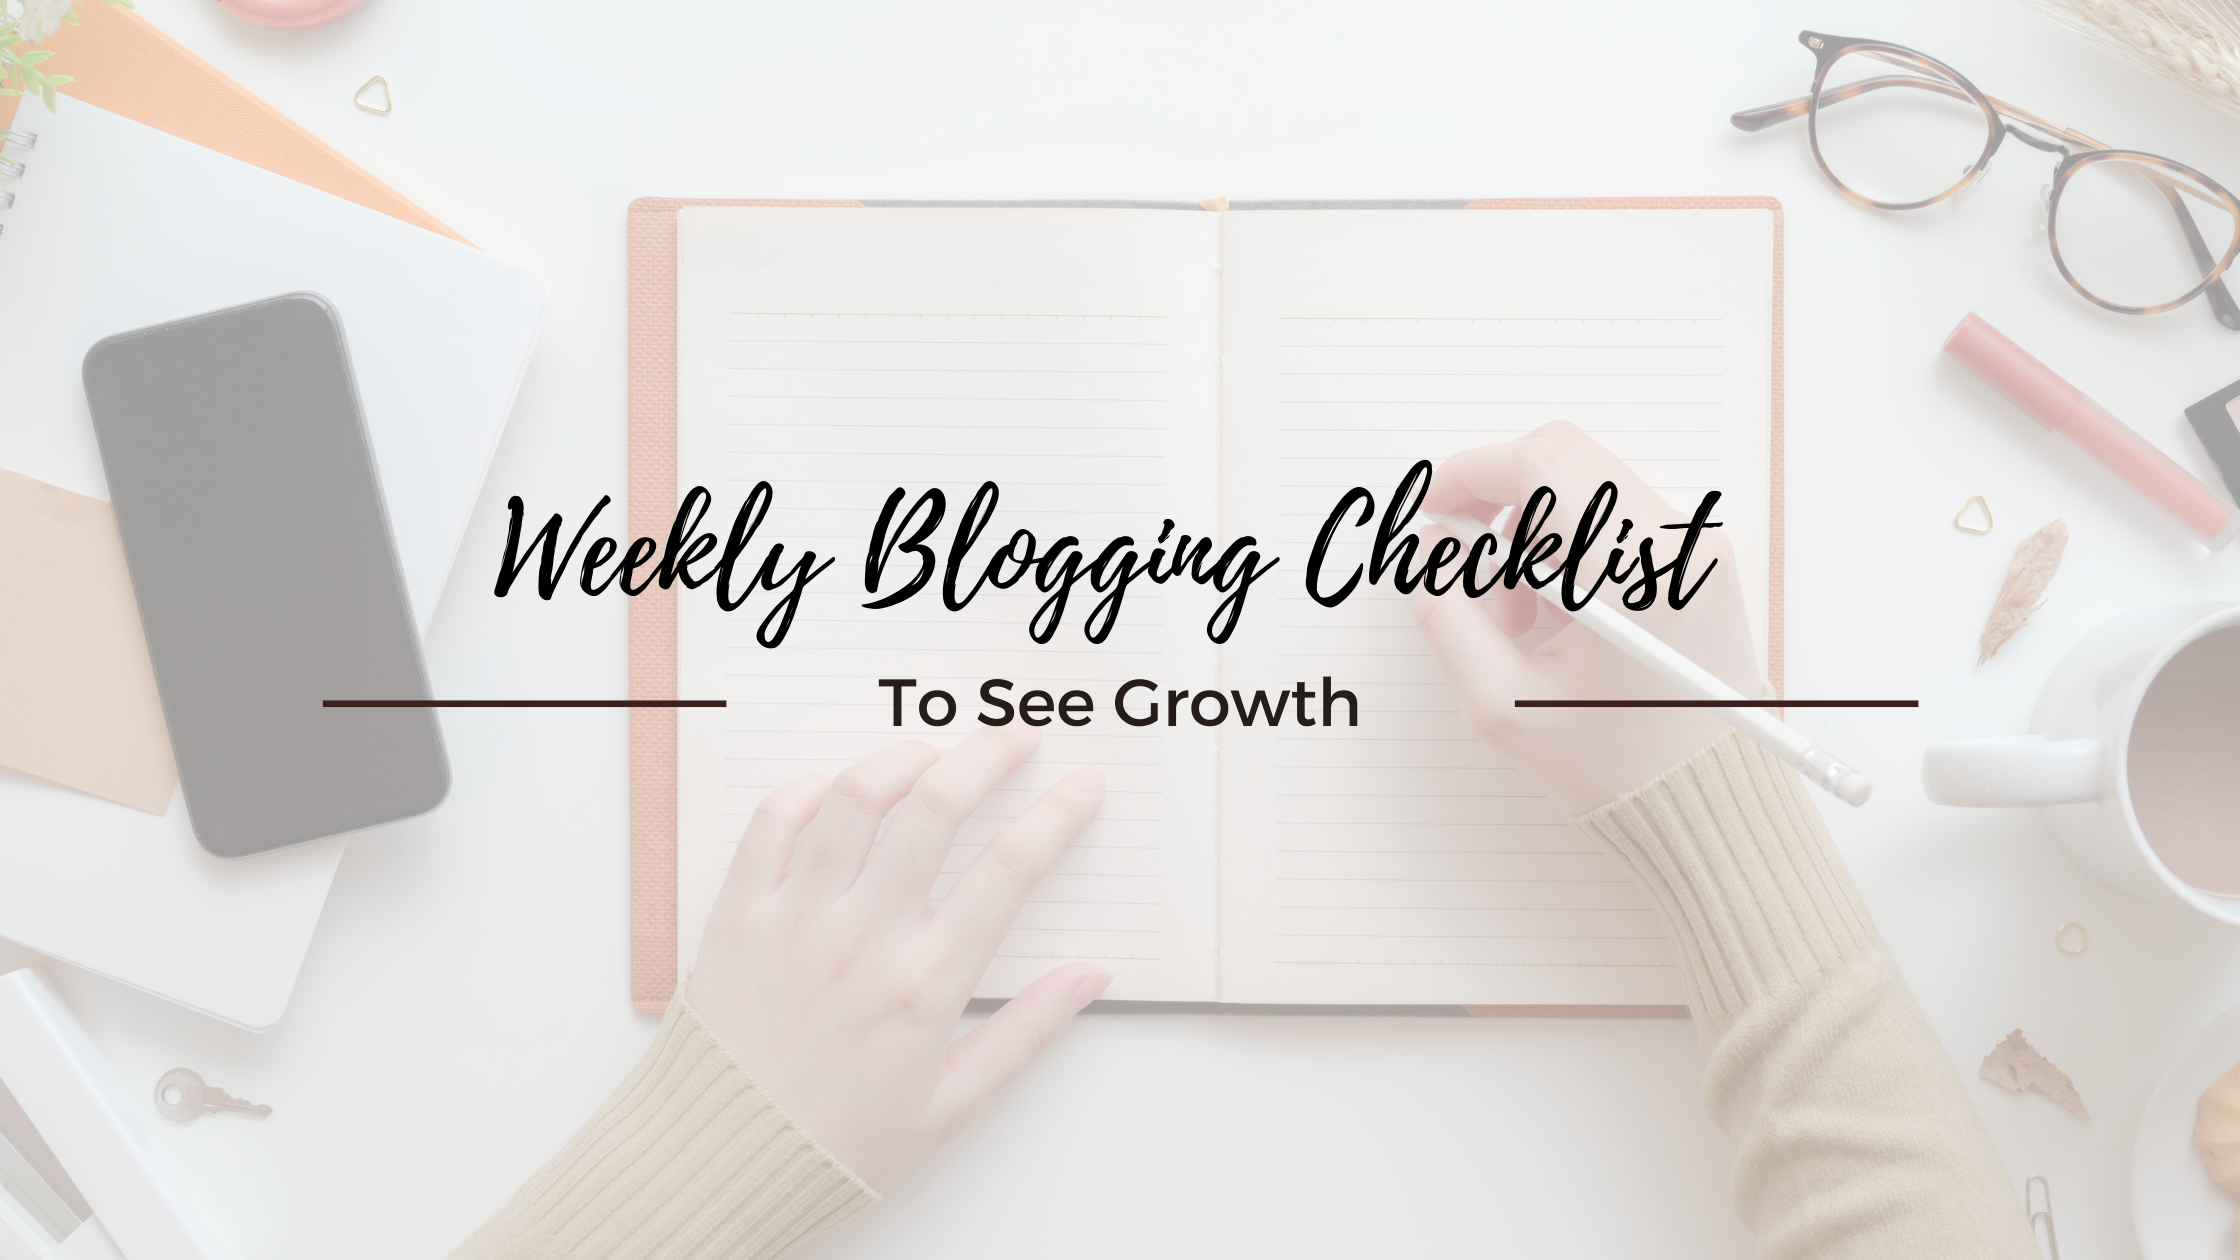 Weekly Blogging Tasks To See Growth